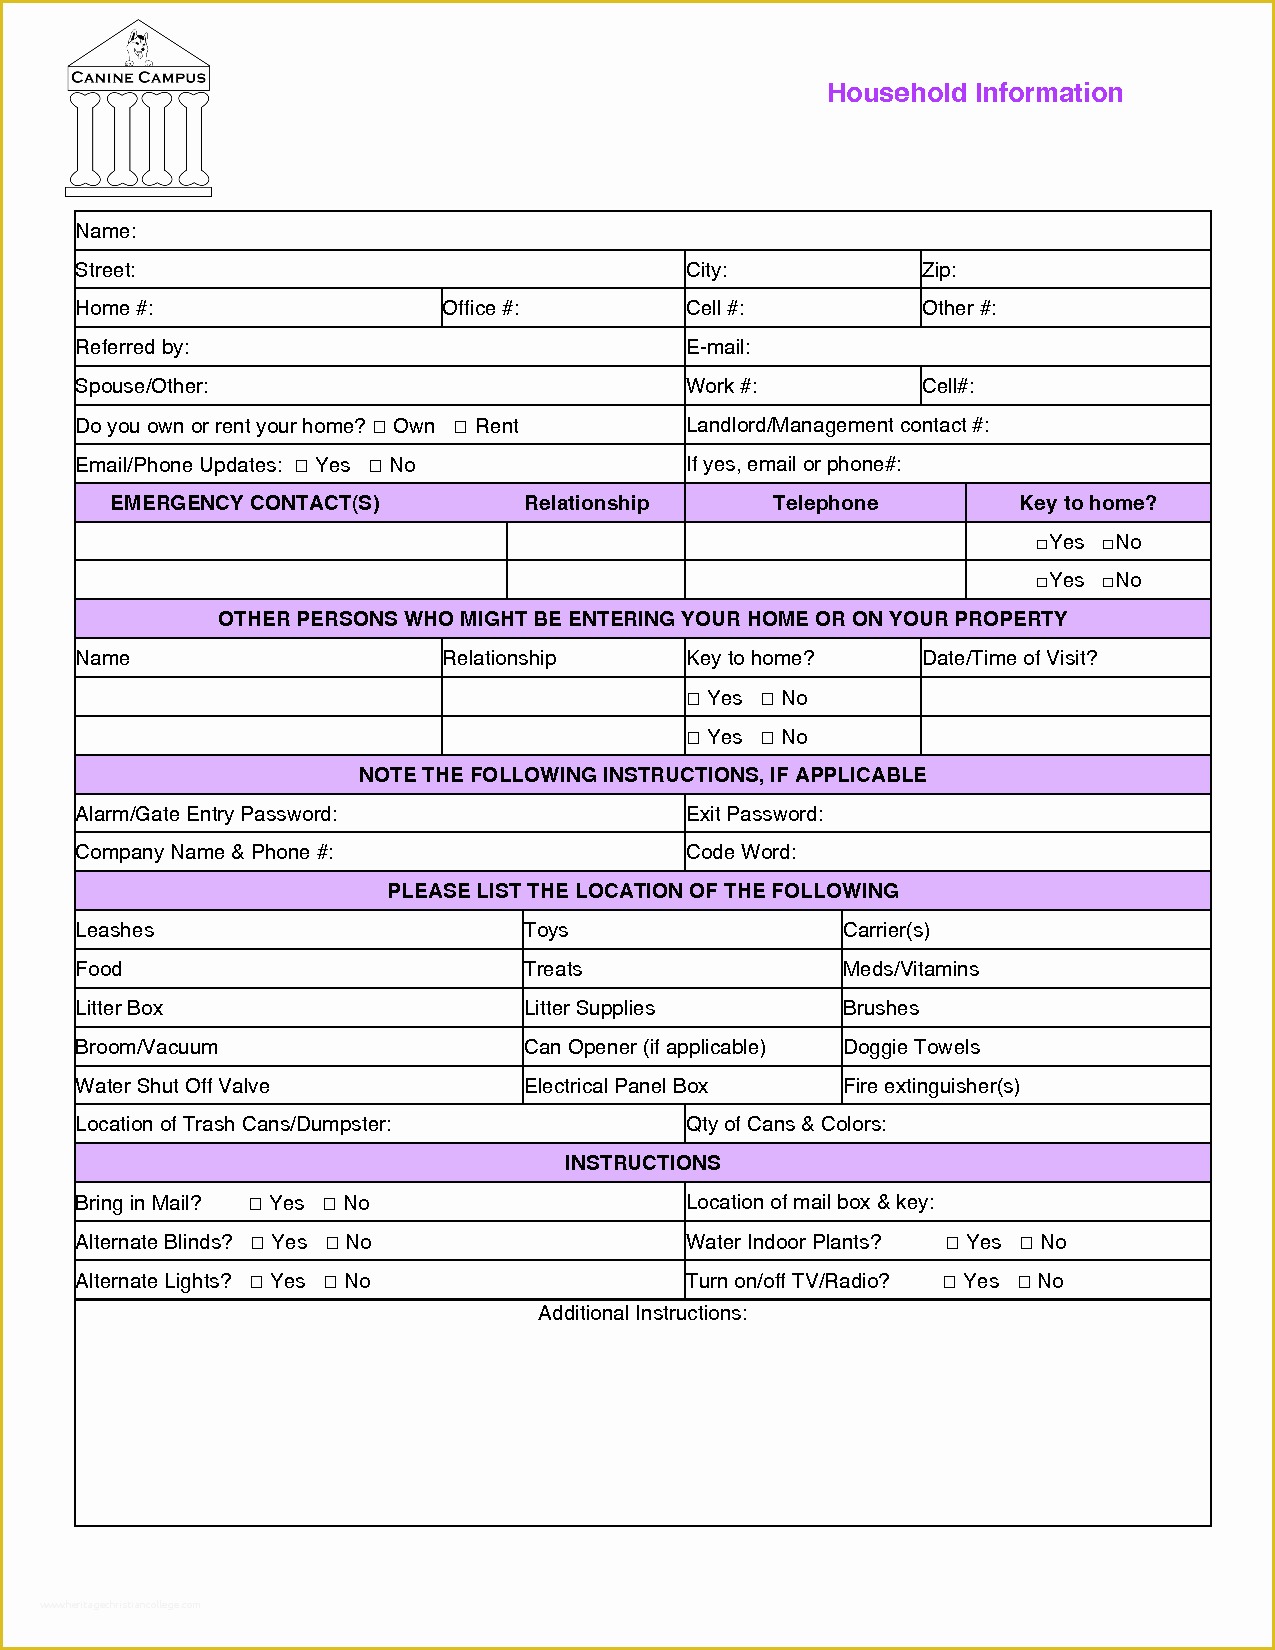 Free Dog Training Contract Template Of Pet Sitting Contract form by Reb Pet Sitting forms